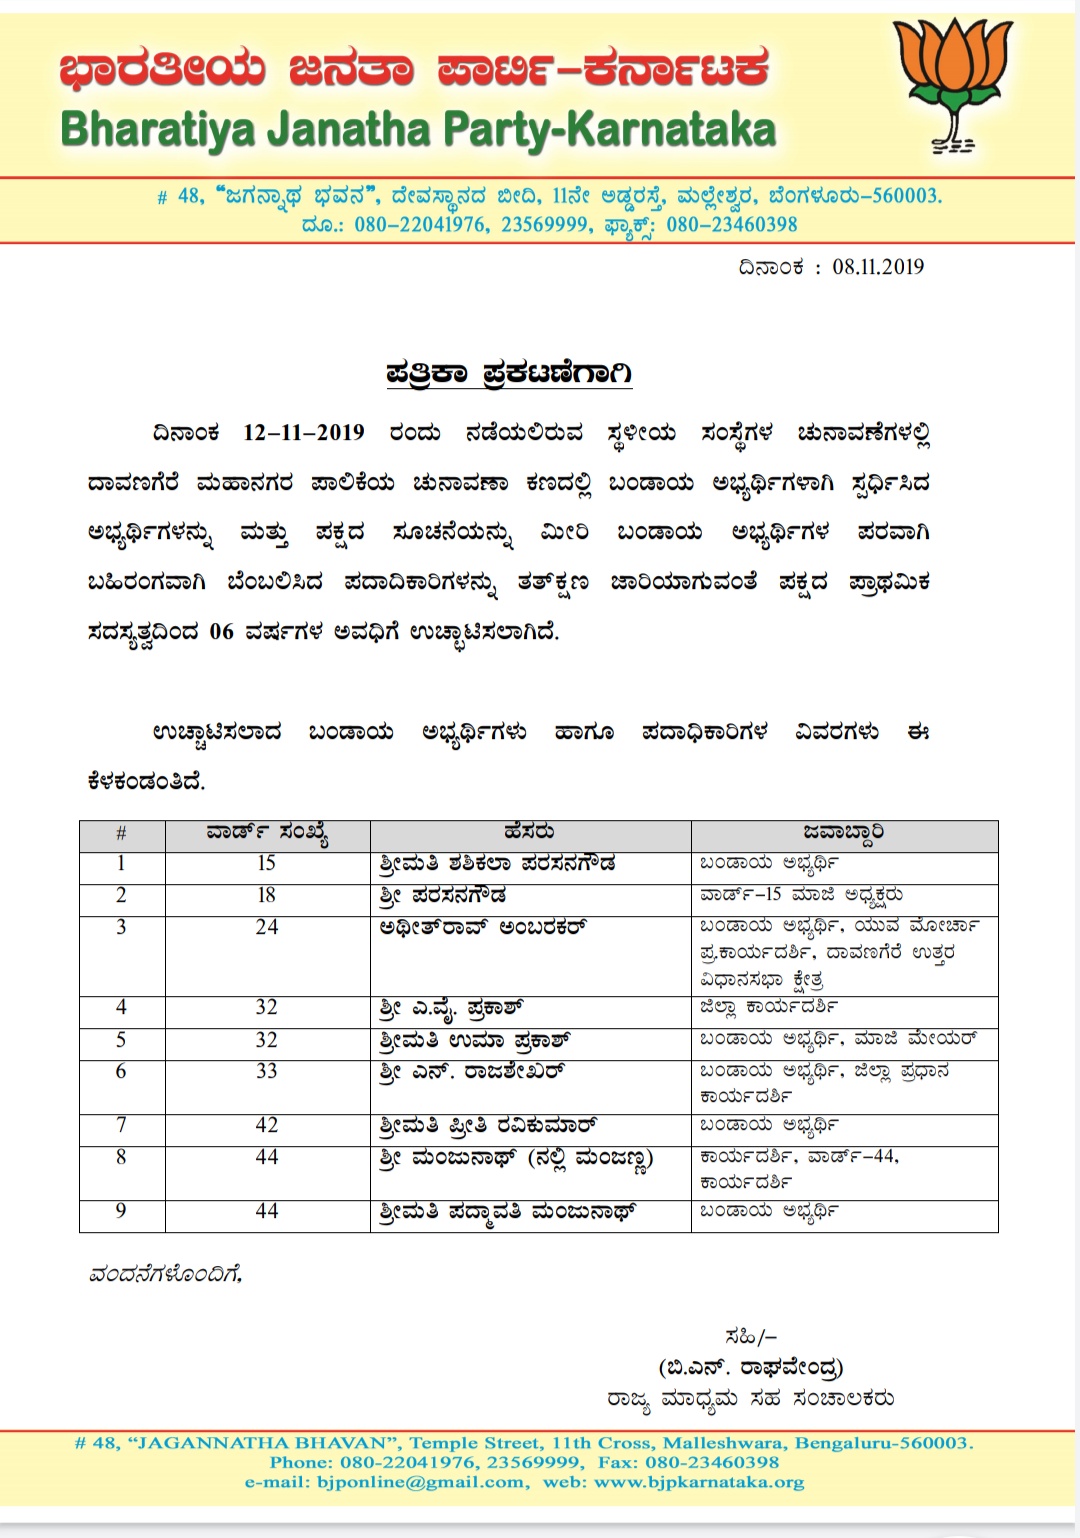 Davanagere BjP Rebels Expelled From the Party